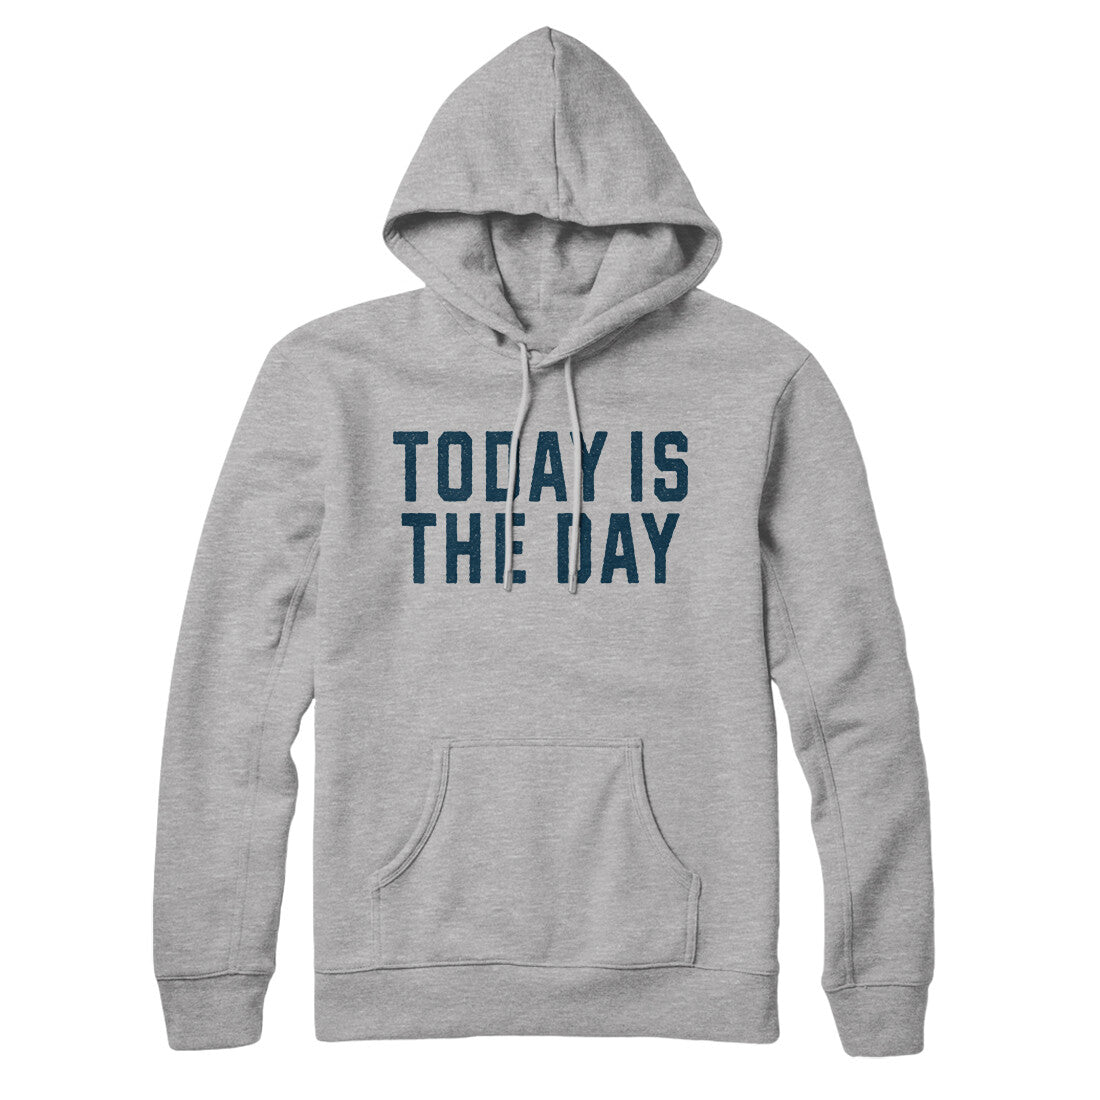 Today is the Day in Heather Grey Color